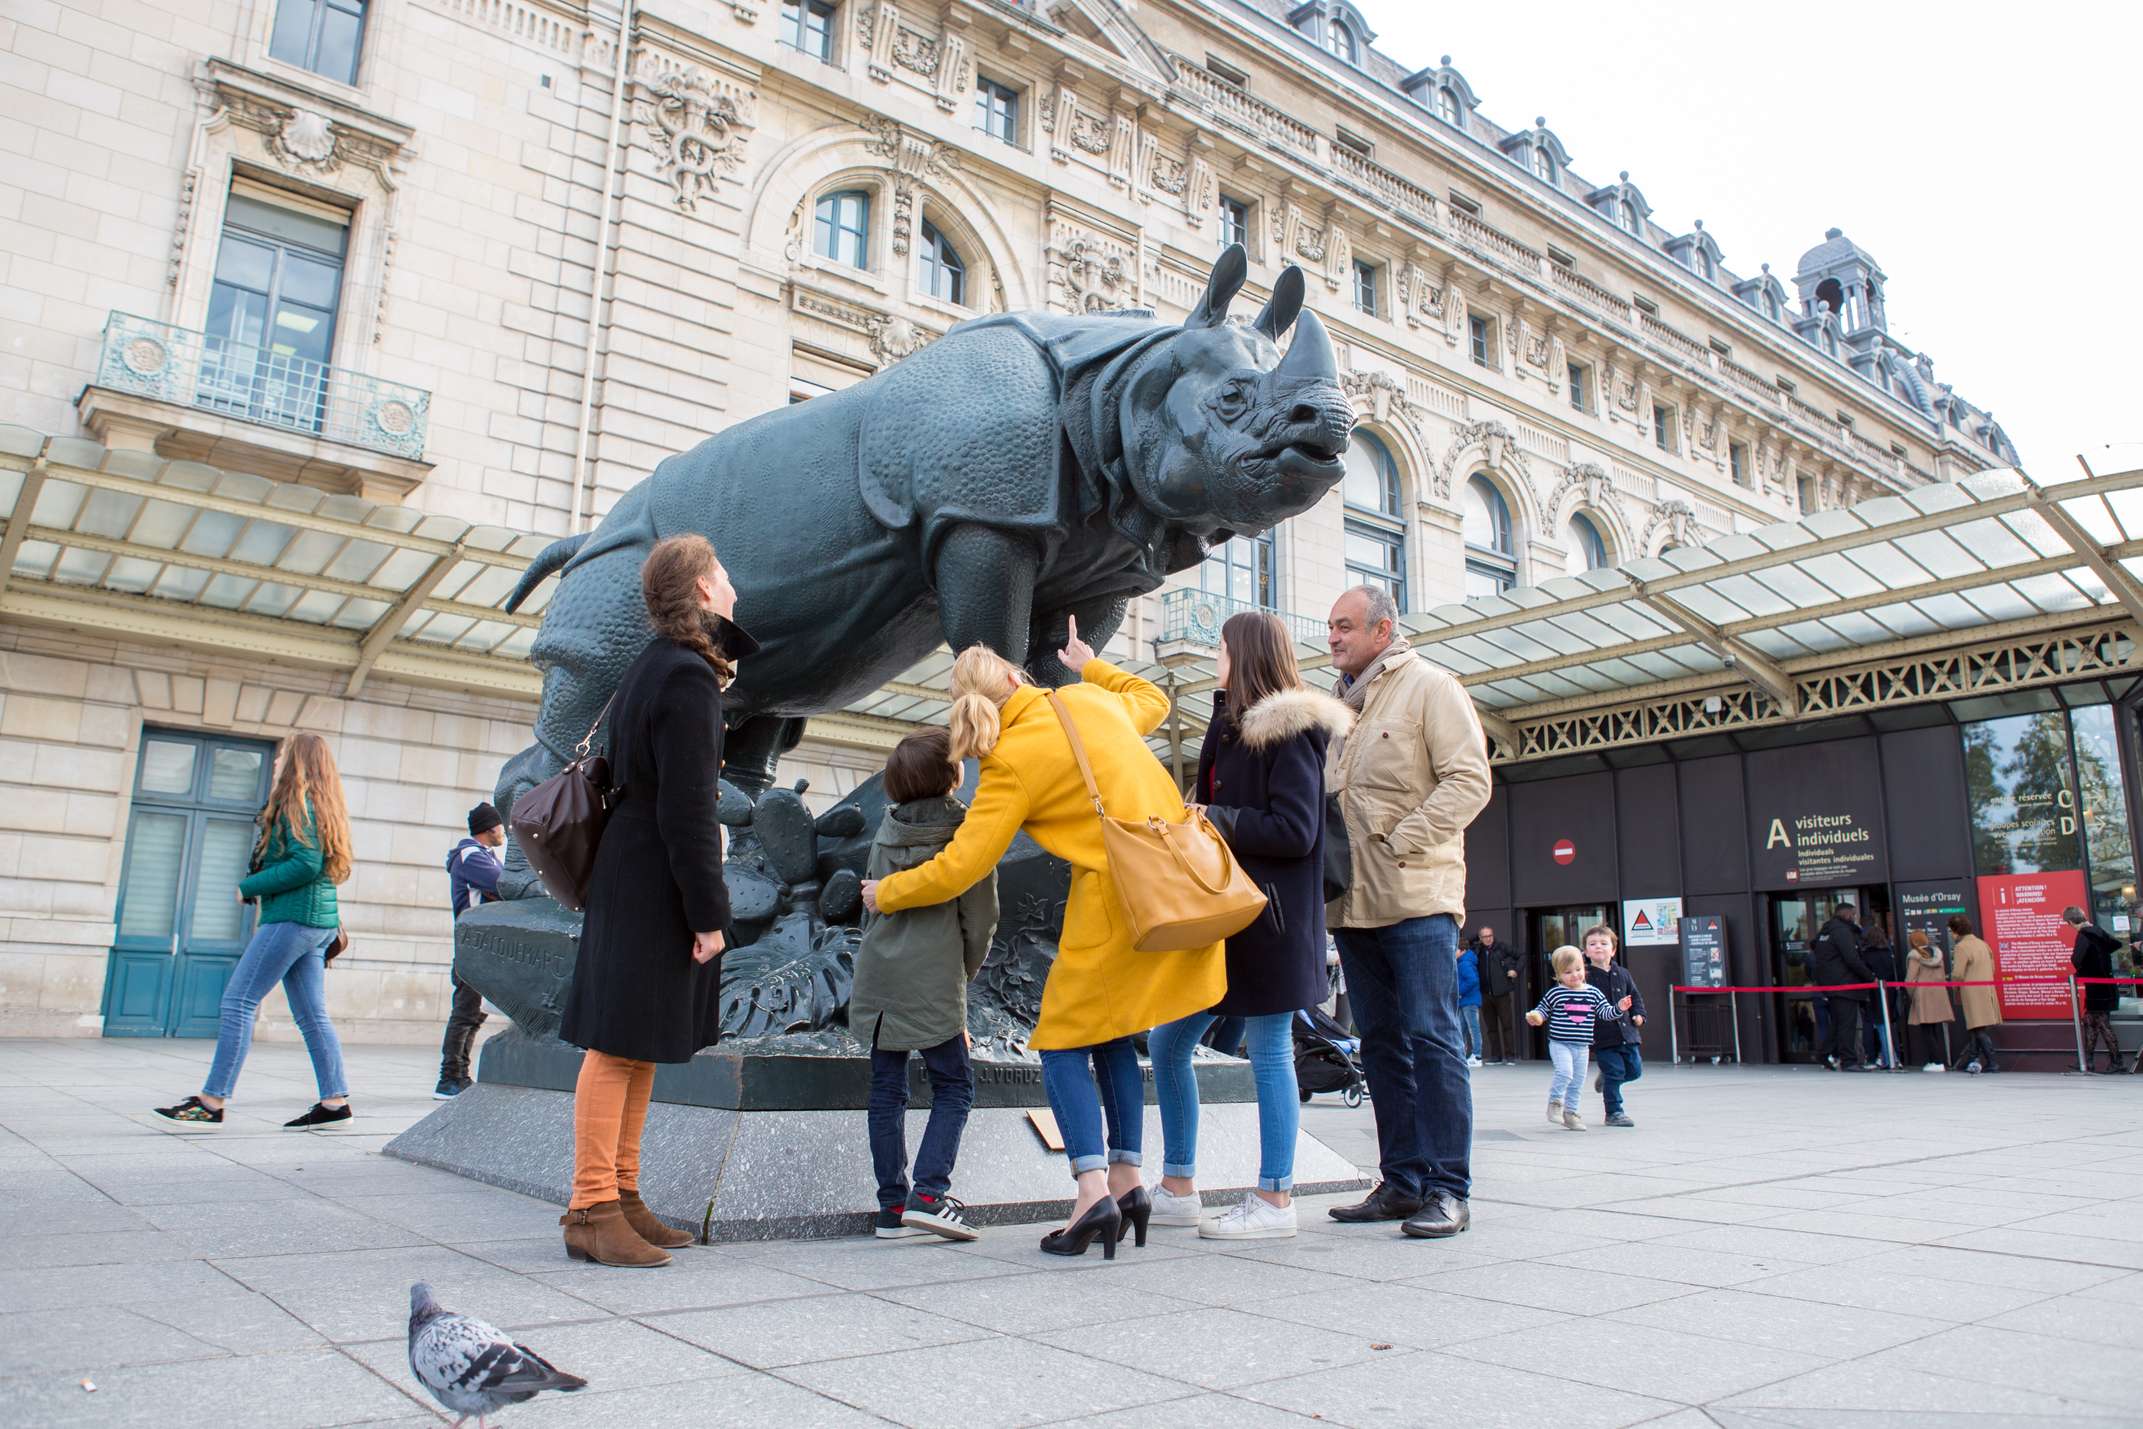 Visitors Guide to Orsay Museum (Musée d'Orsay) - Paris Discovery Guide